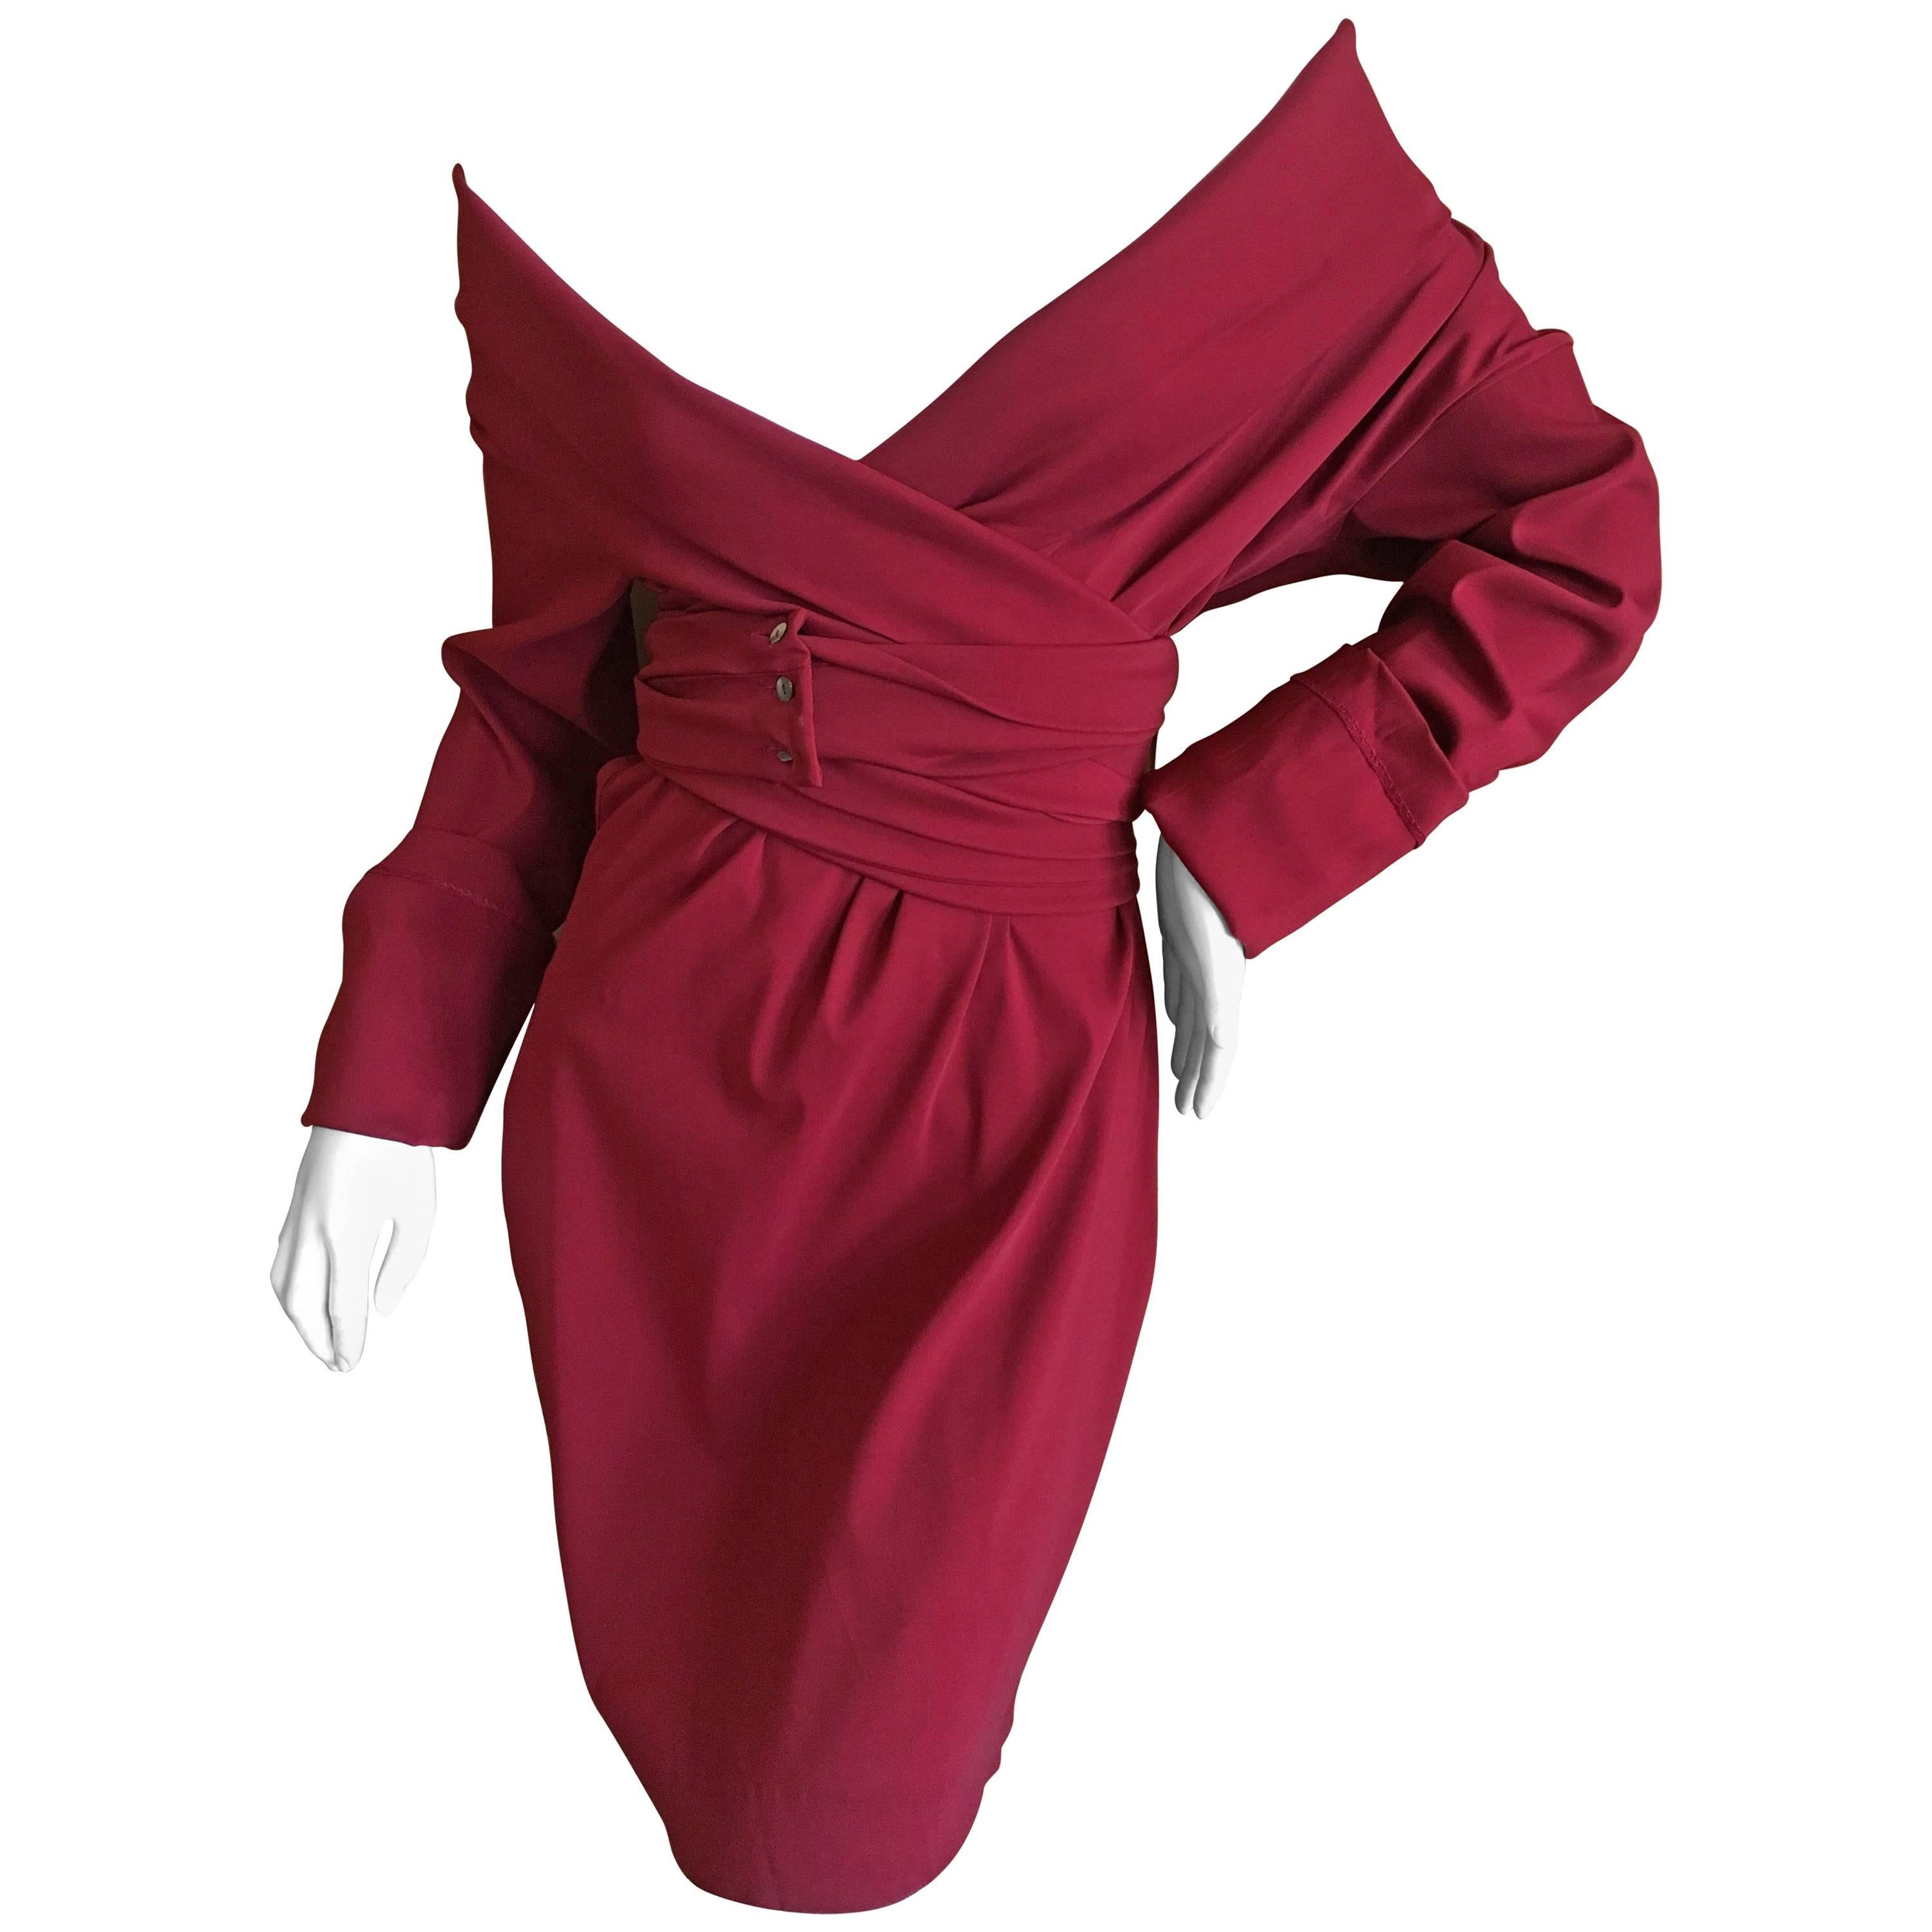 Romeo Gigli for Bergdorf Goodman Revealing Red Wrap Dress For Sale